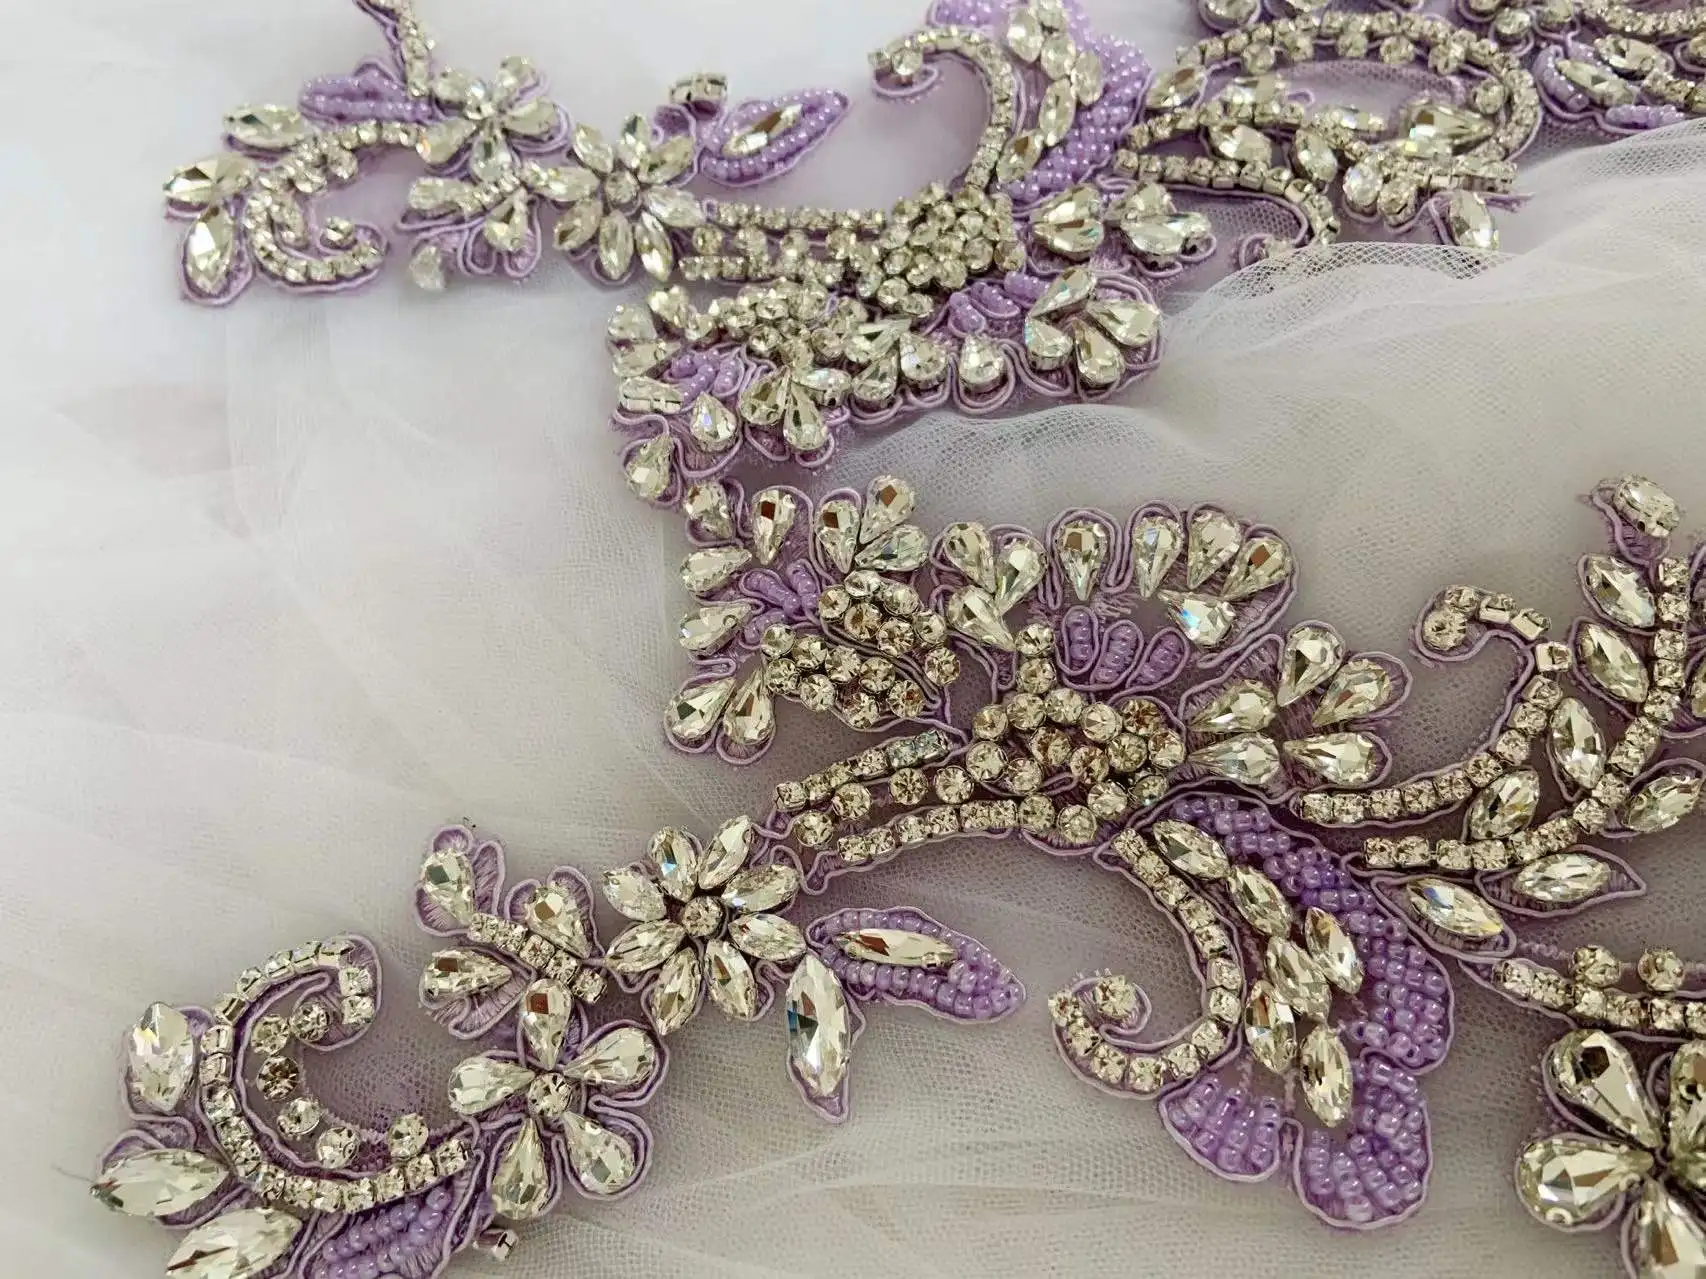 1 Pair Purple Luxury Rhinestone Applique Crystal Bodice Patch 3D Flowers Sparkle Bead for Couture,Dance Handcrafted,Bridal Decor